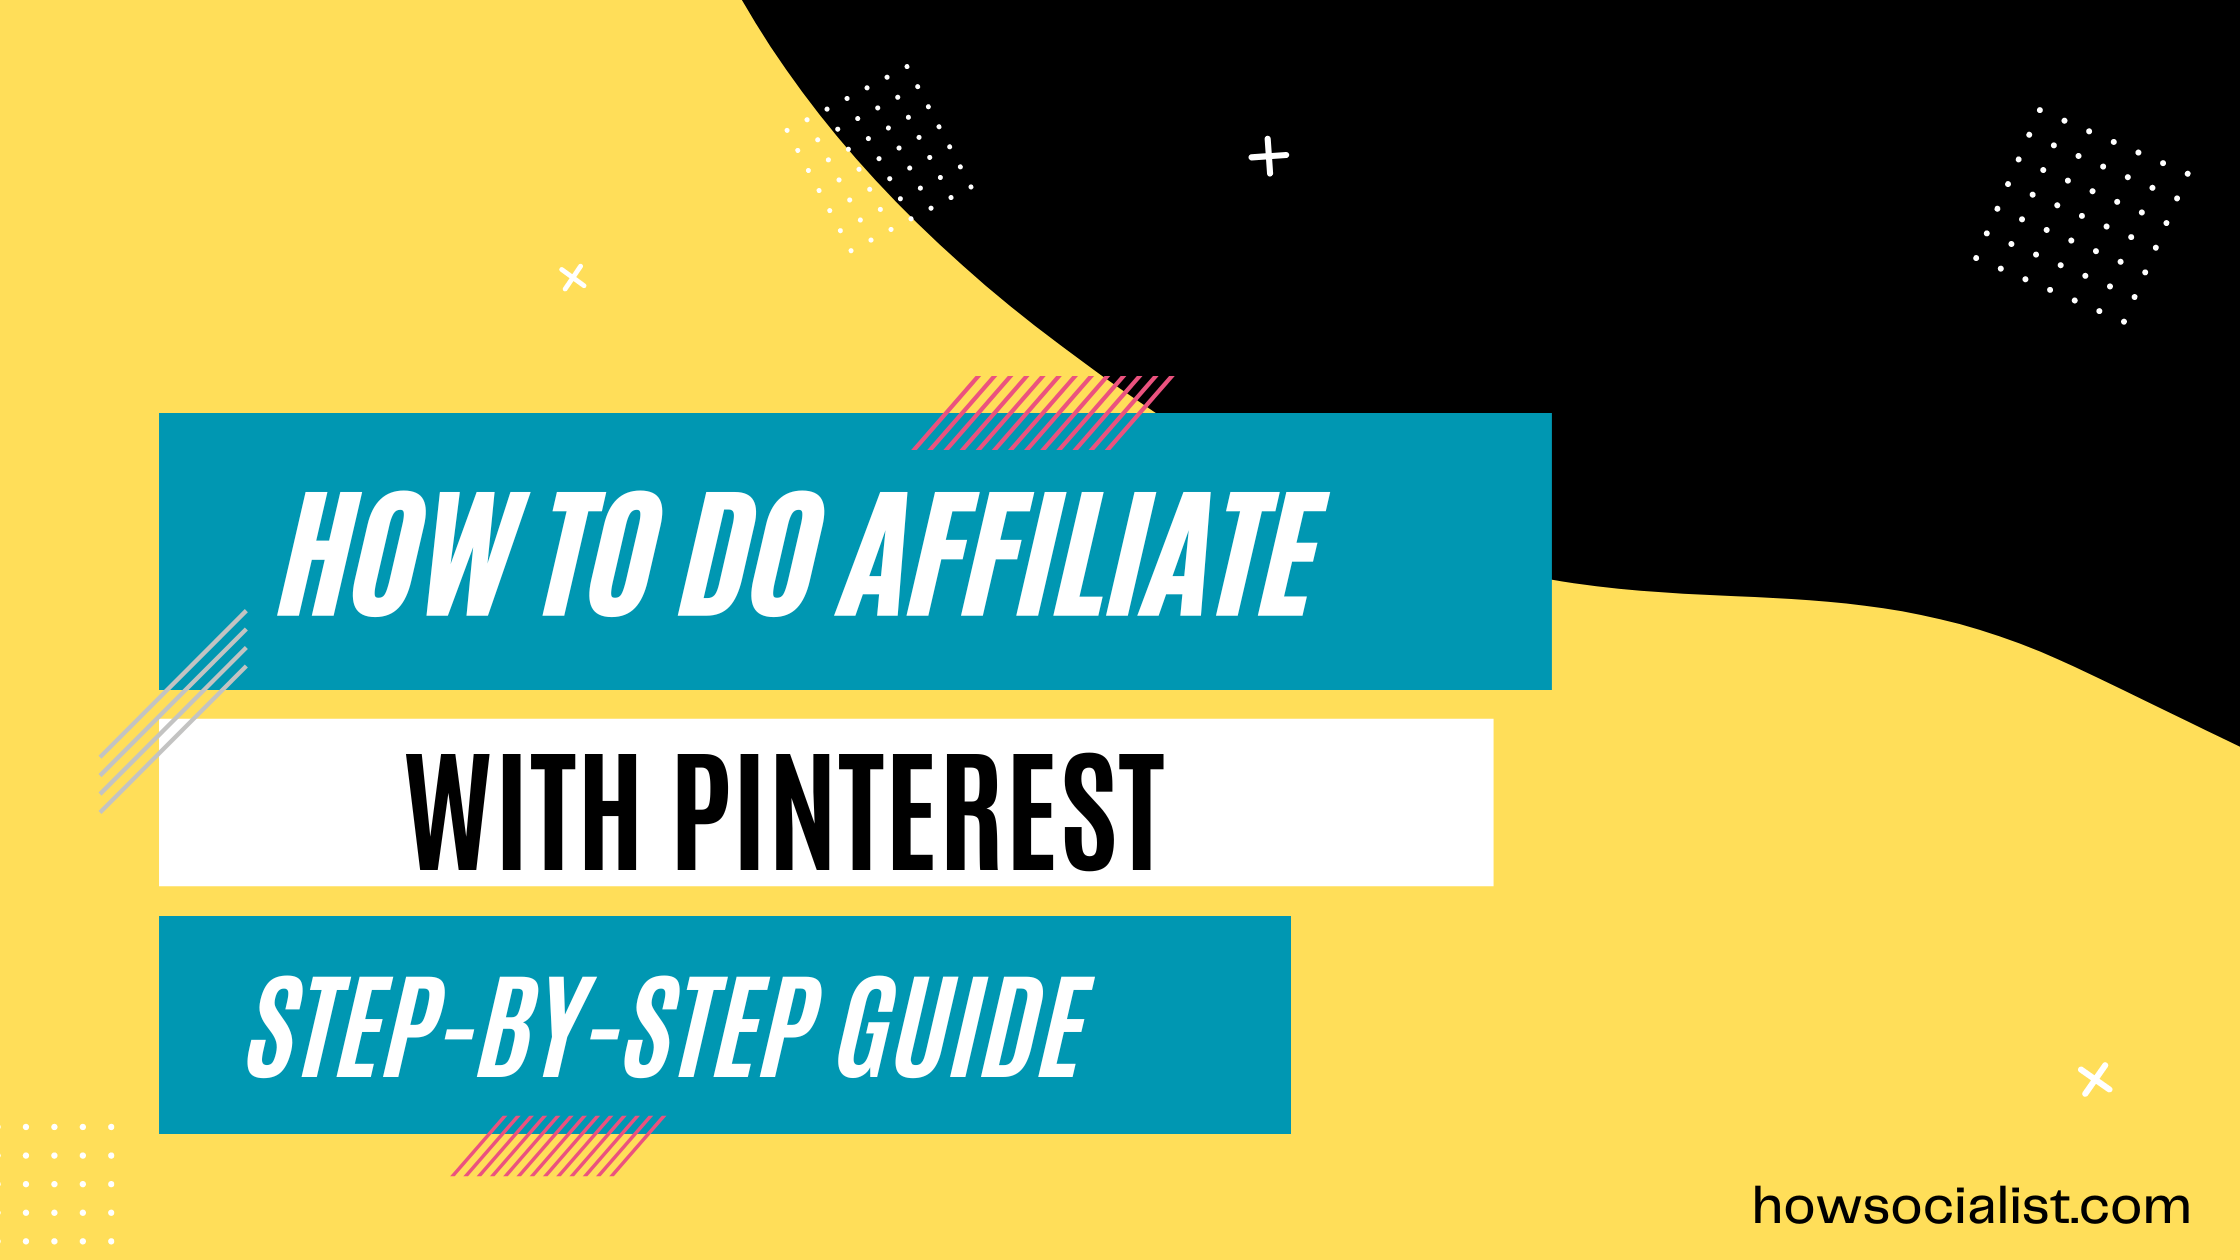 How To Do Affiliate Marketing With Pinterest - Step-bt-Step Guide